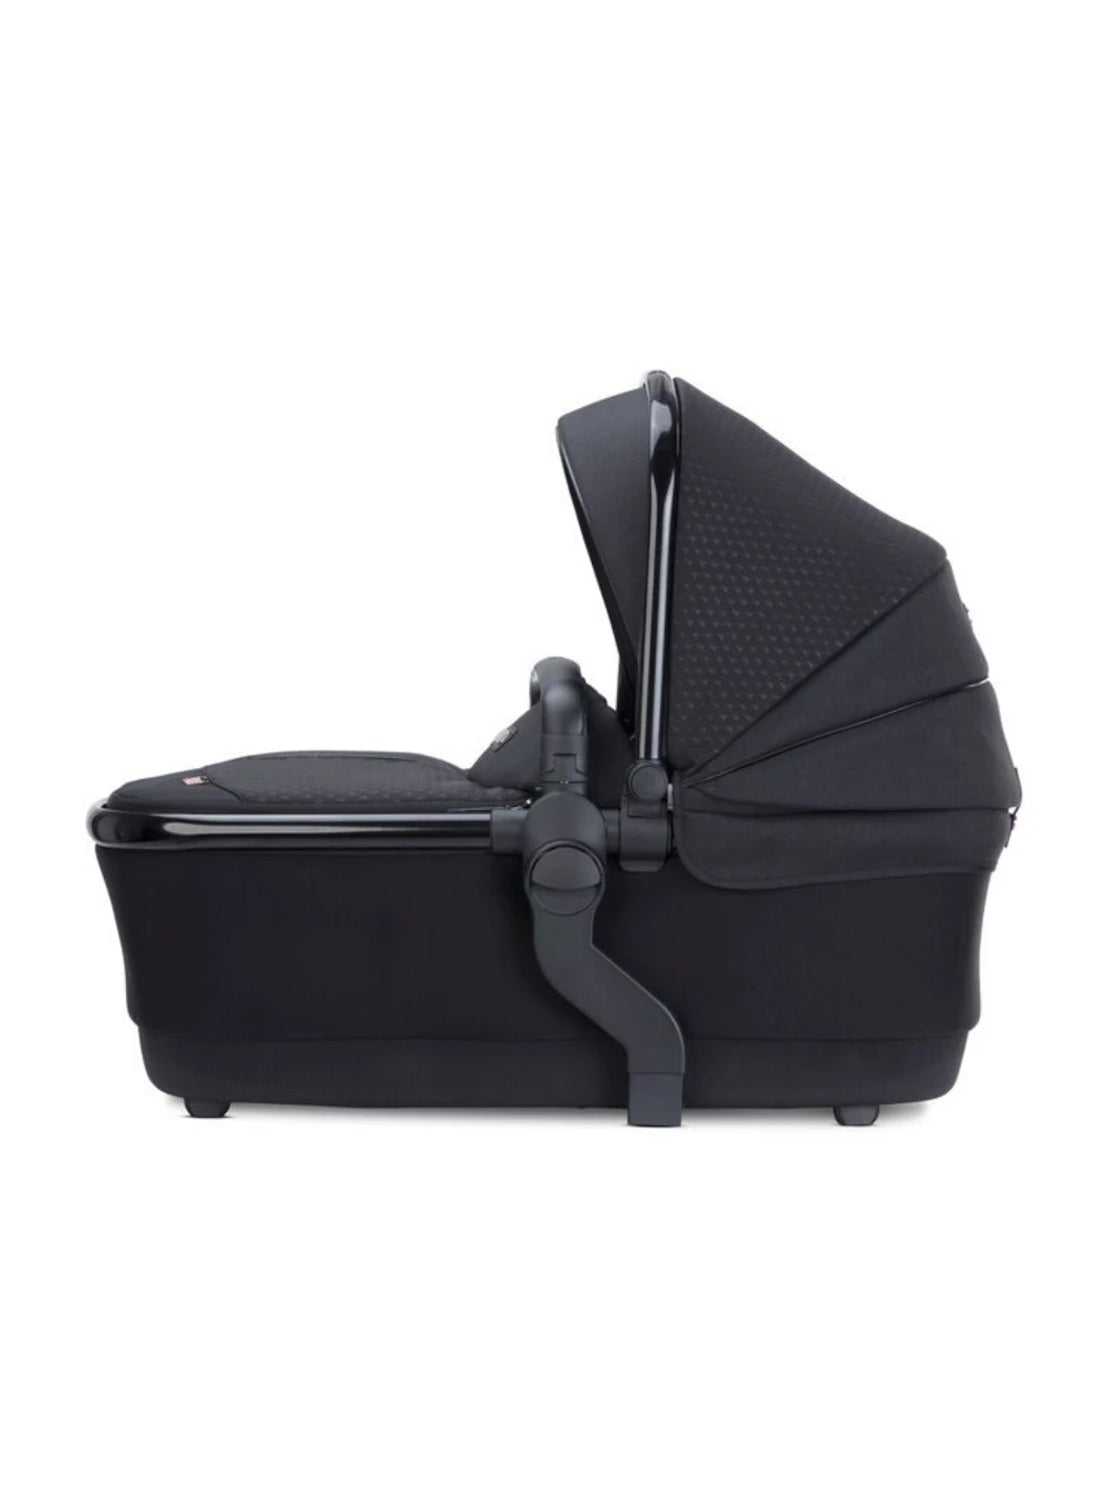 Silver Cross Wave Eclipse 2021 Extra Bassinet - ANB Baby -$300 - $500